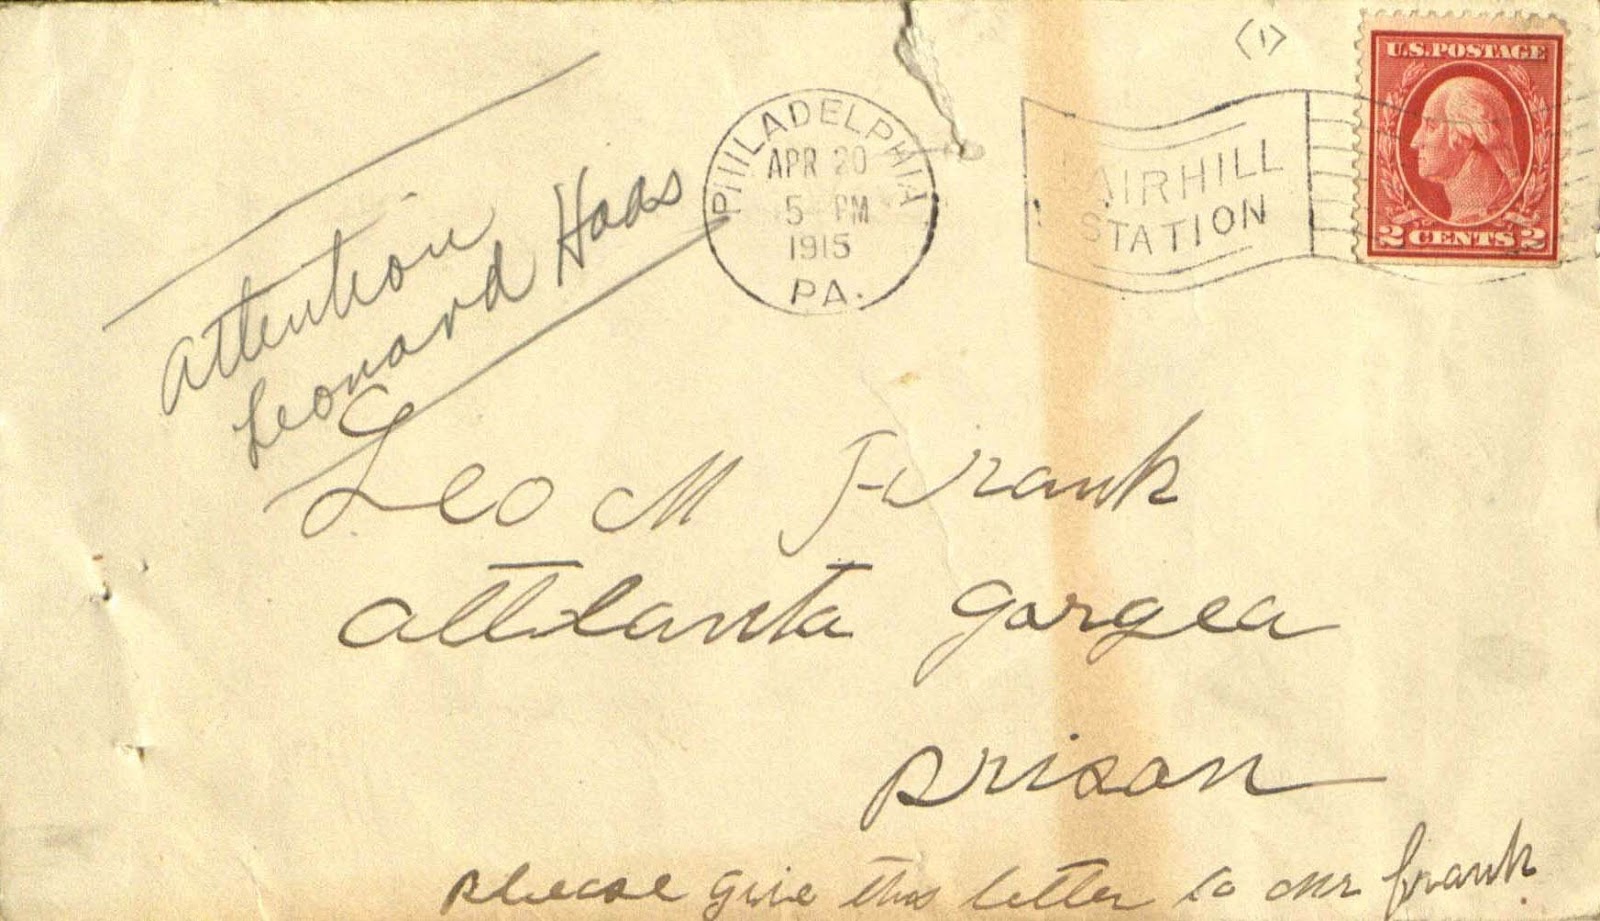 Scanned envelope addressed to Leo M. Frank while Frank was in prison with a stamp marked: April 20, 1915 at 5pm Philadelphia time